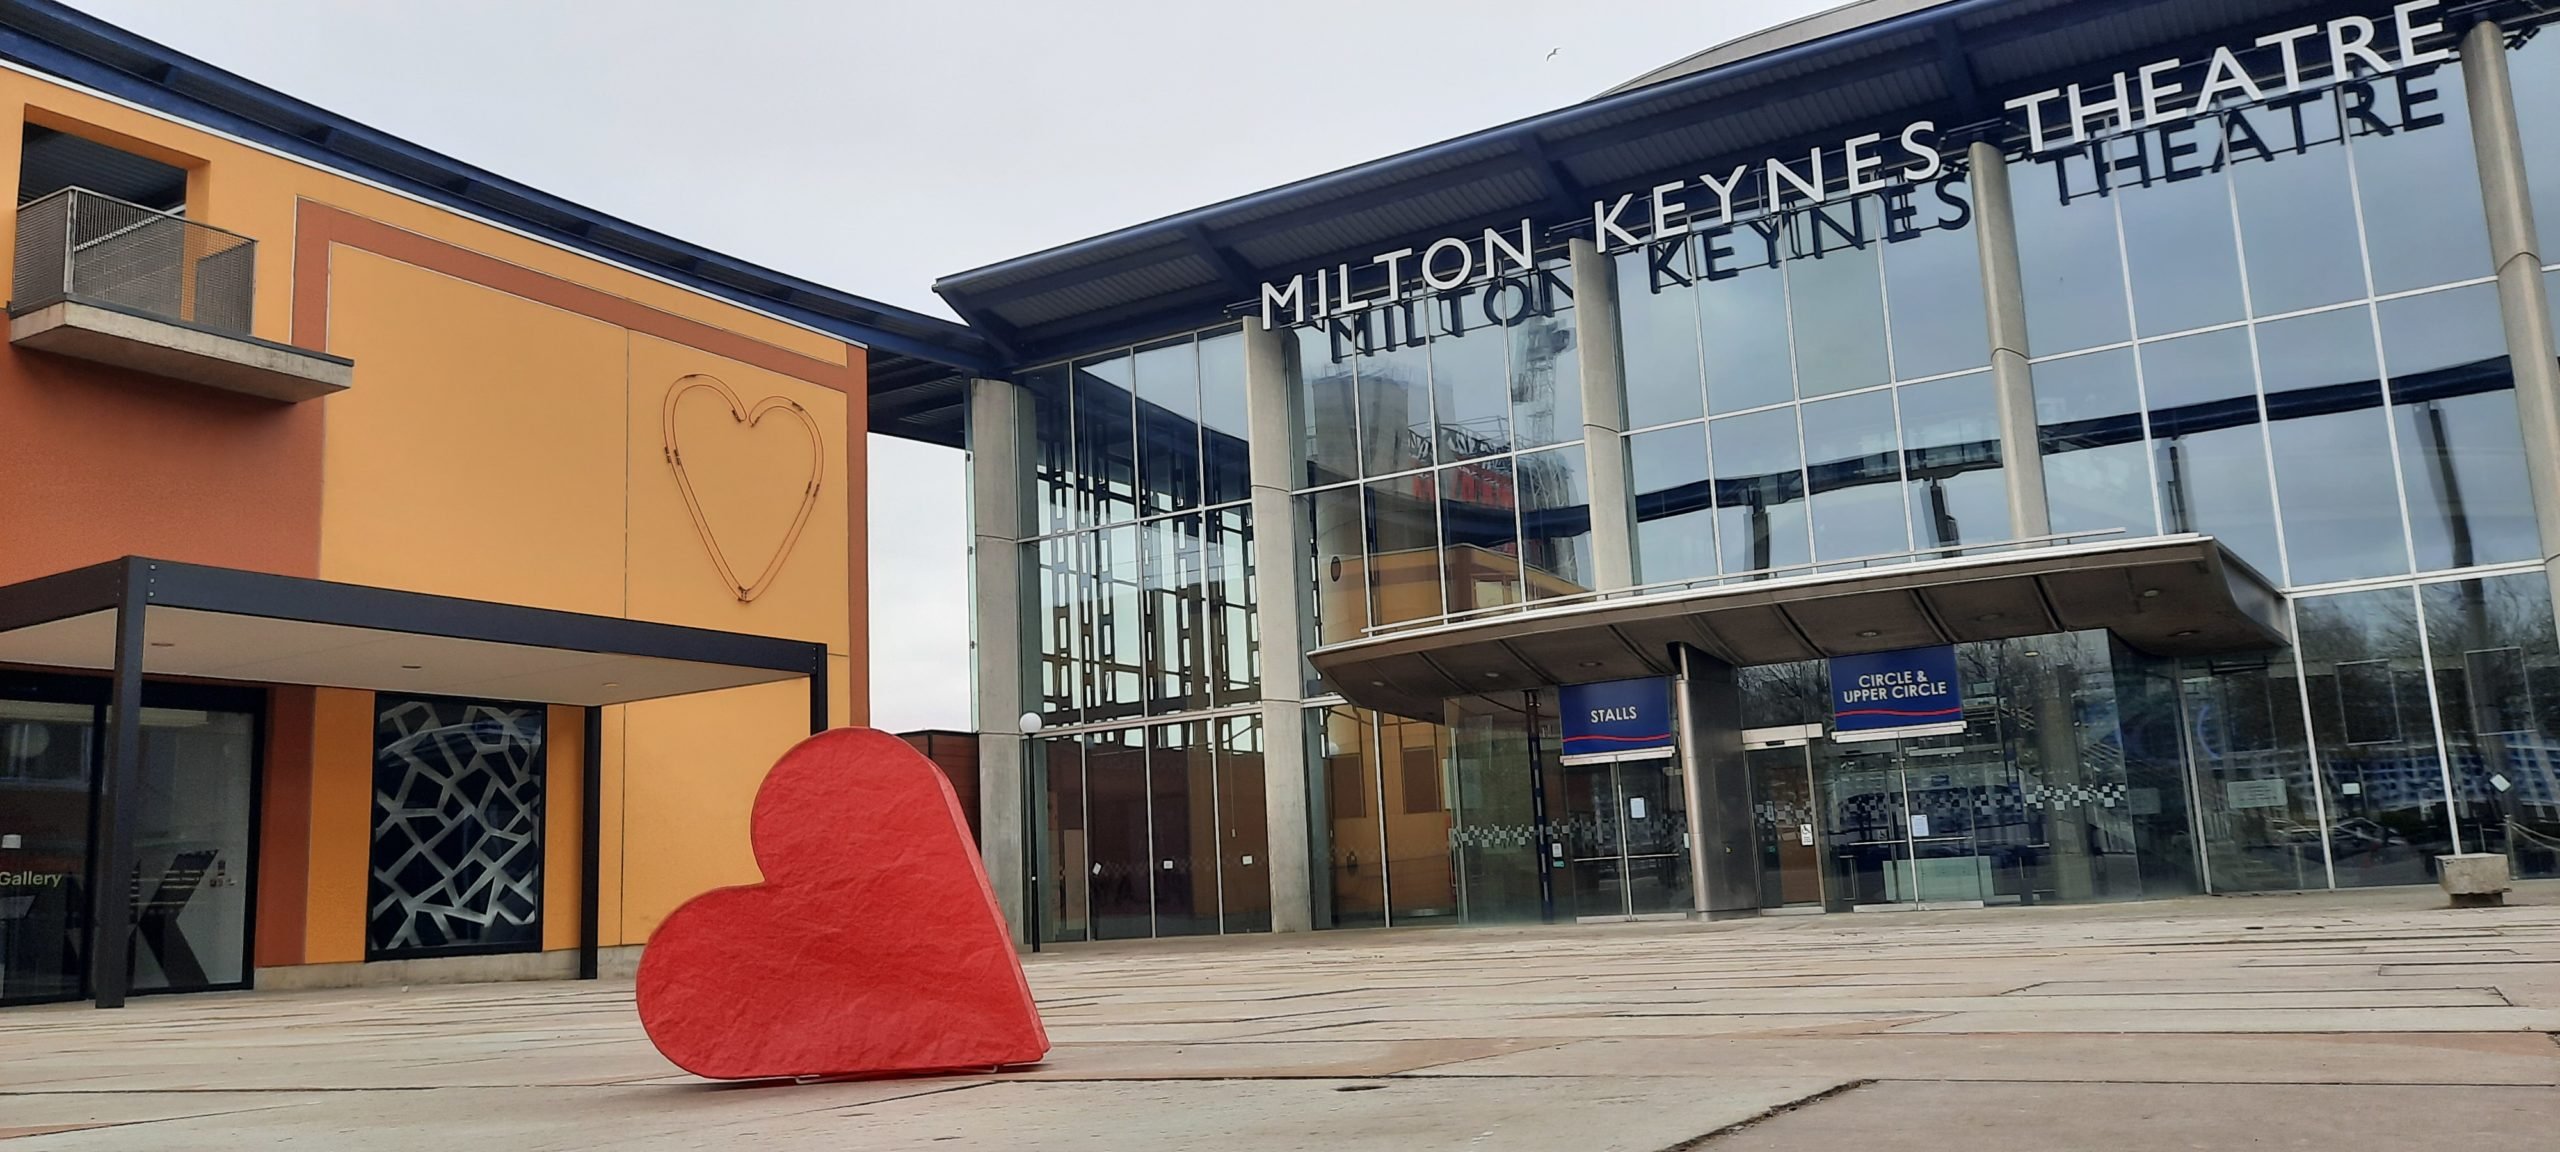 #LoveMK Day 2021 asks people to look forward again